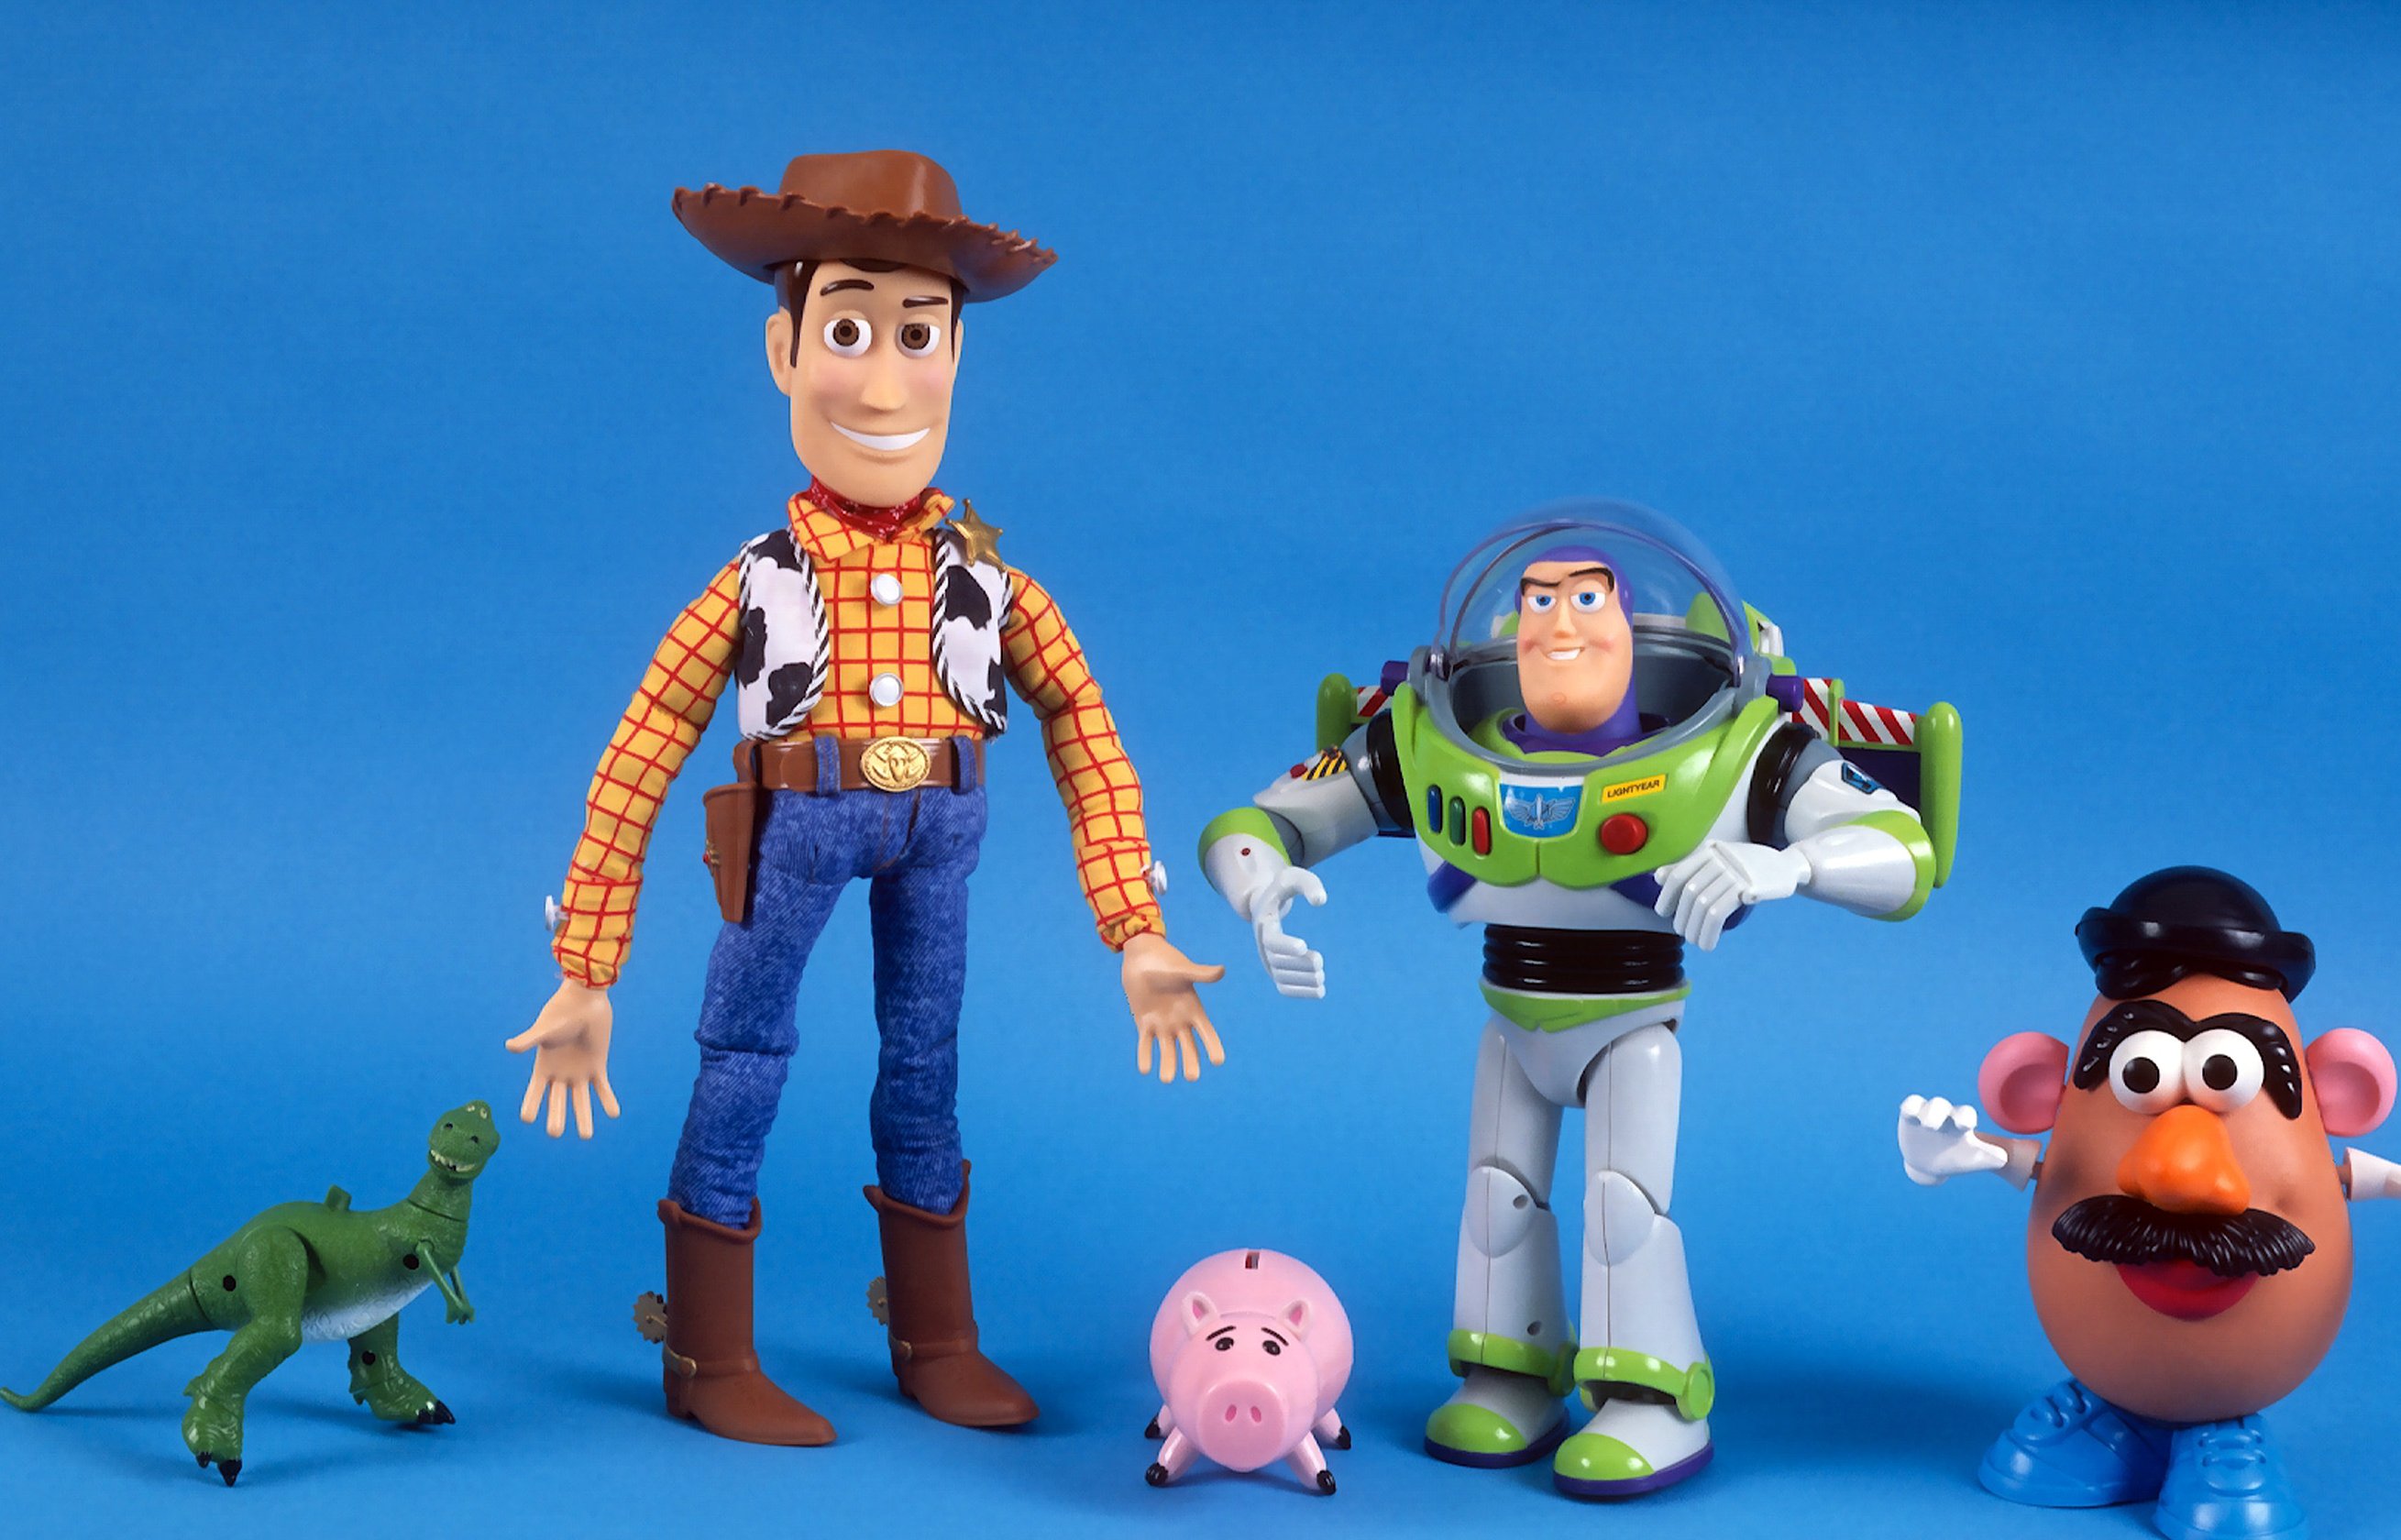 promoción Pólvora Lengua macarrónica Boardroom on Twitter: "On this day in 1995: Disney releases Toy Story, the  first feature-length computer-animated movie ever made. ➖budget: $30M ➖box  office: $363M ➖100% Rotten Tomatoes rating ➖produced on total budget